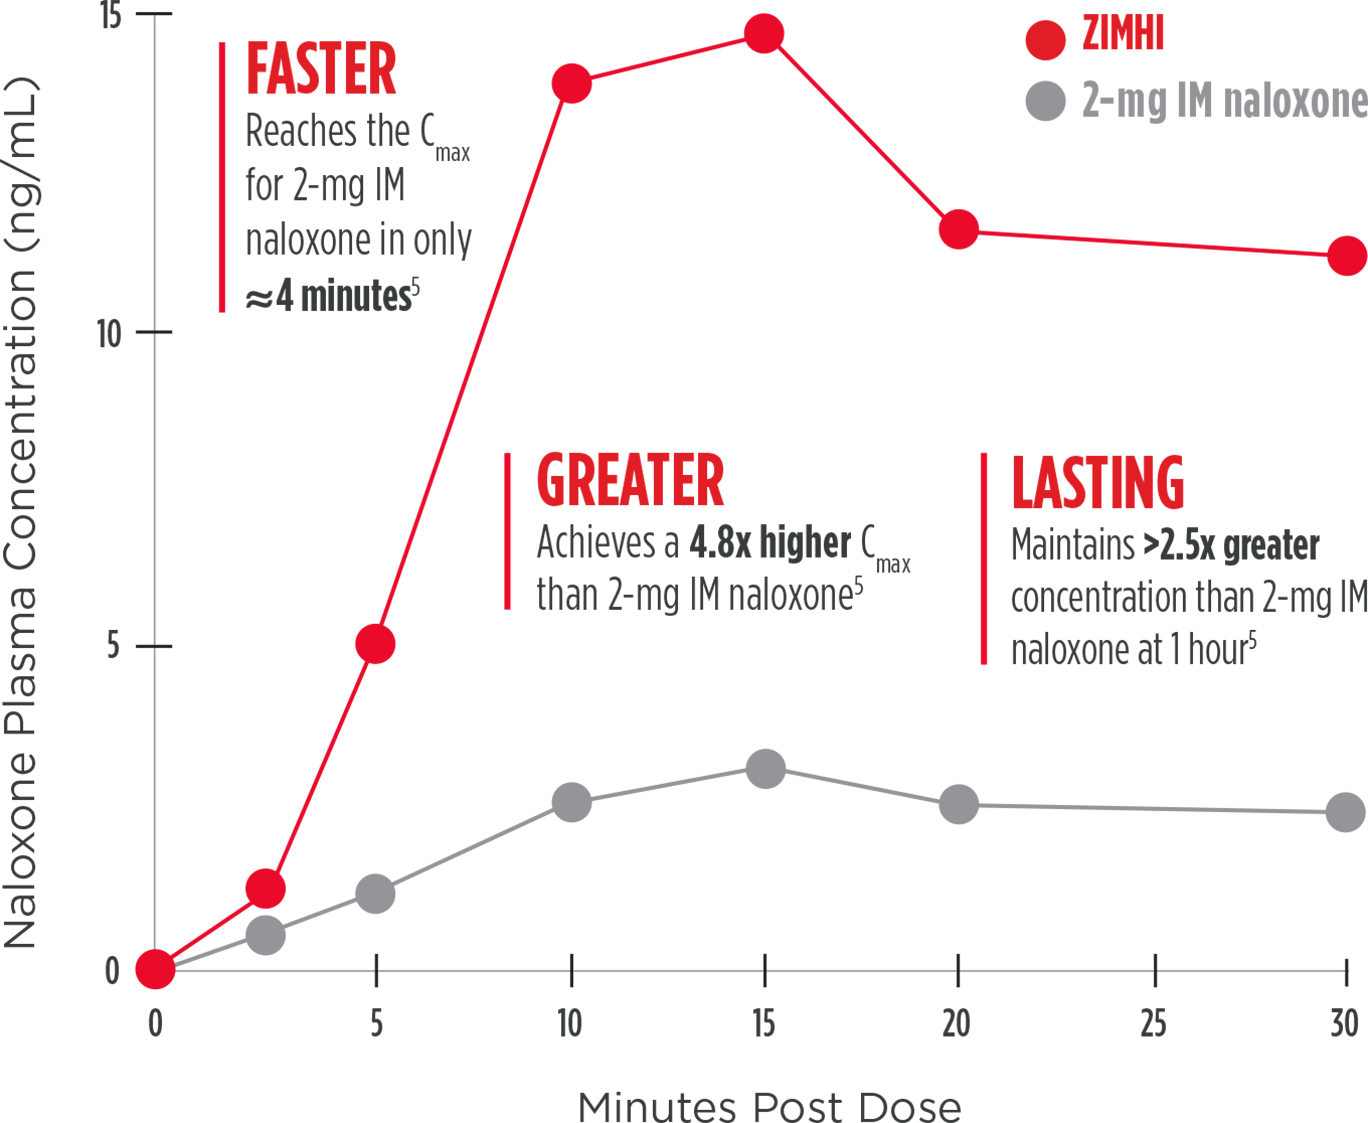 line graph displaying that ZIMHI may be FASTER: Reaches the Cmax for 2-mg intramuscular naloxone in only ≈4 minutes; GREATER: Achieves a 4.8x higher Cmax than 2-mg intramuscular naloxone; and LASTING: Maintains a more than 2.5x greater concentration than 2-mg intramuscular naloxone at 1 hour